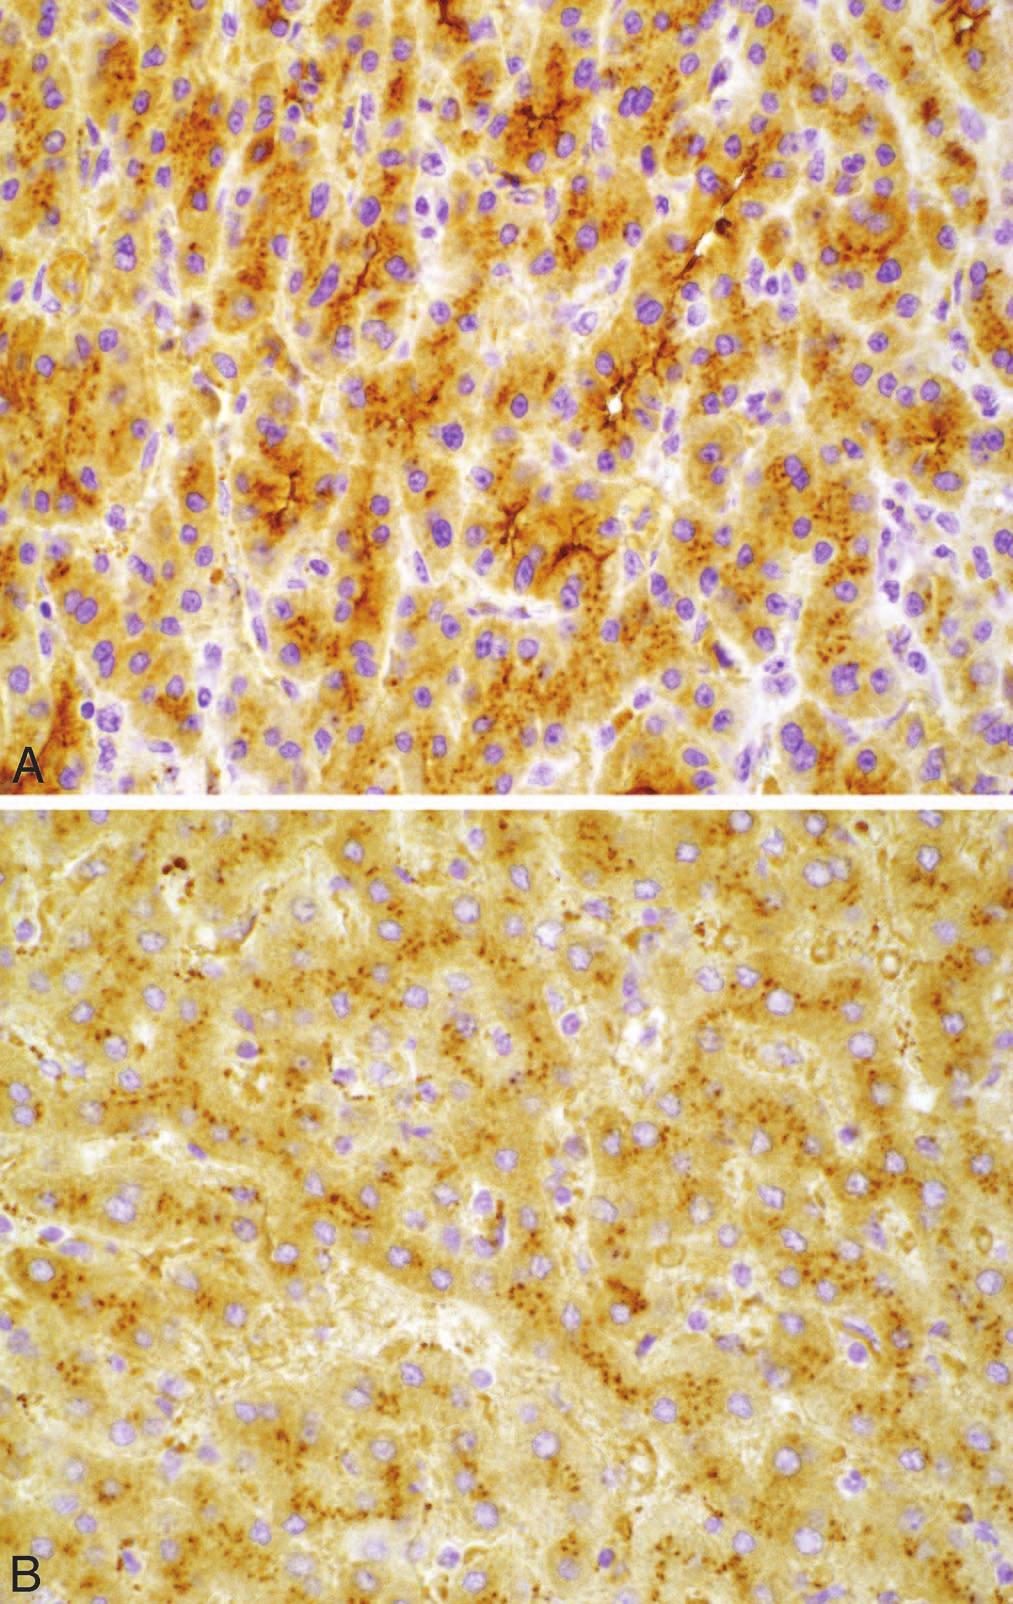 CD34 highlights portal vasculature and sinusoids immediately adjacent to portal tract in nonneoplastic liver (A), but it shows a diffuse (also termed complete ) sinusoidal staining pattern (B) in